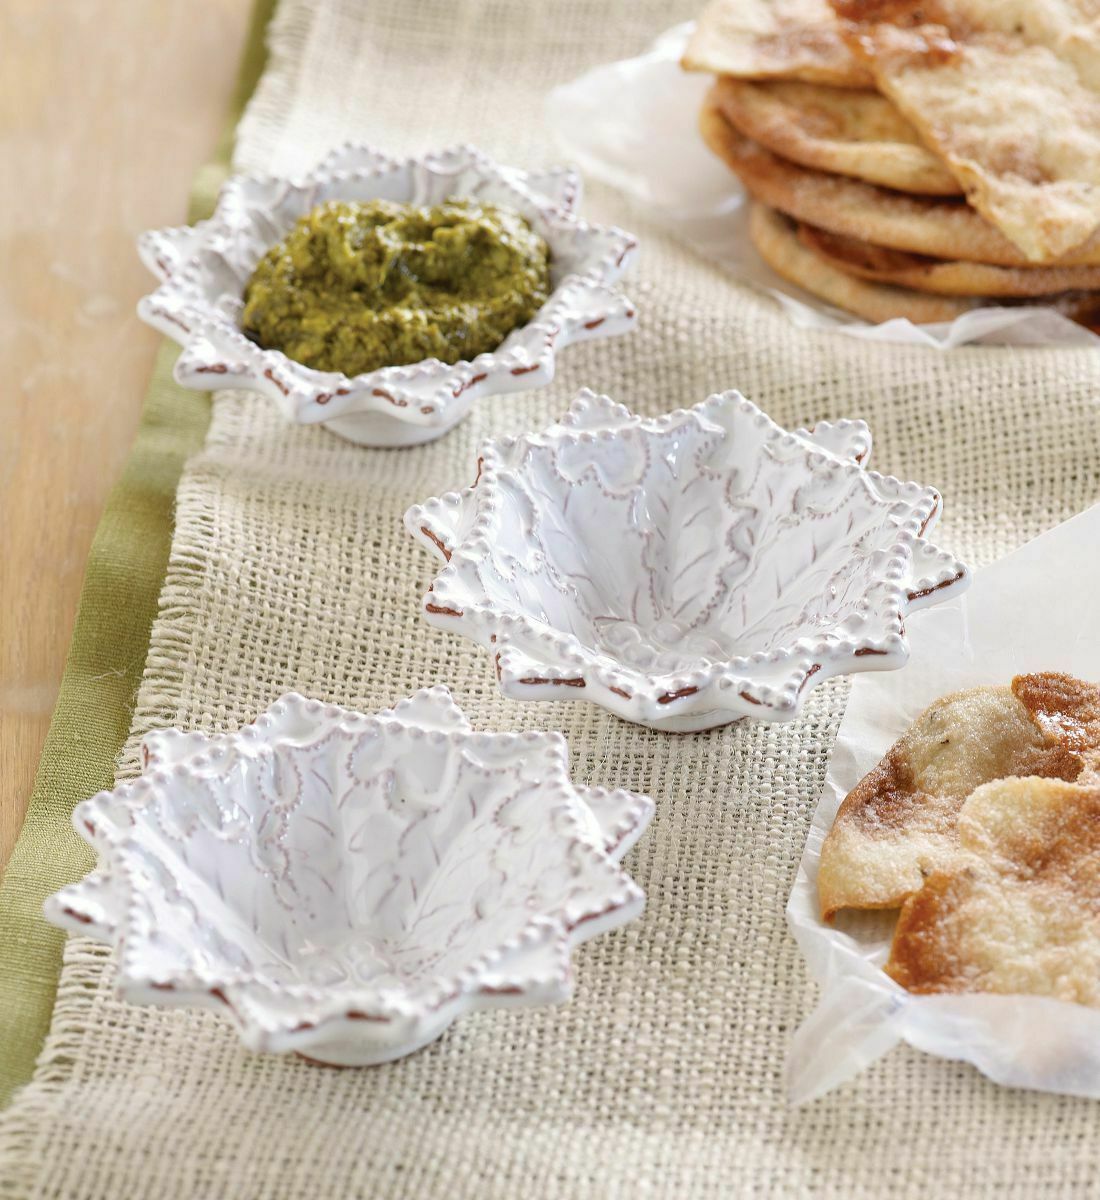 Set of 3 White Glazed Terracotta Holiday Dip Bowls by Mud Pie - $16.77